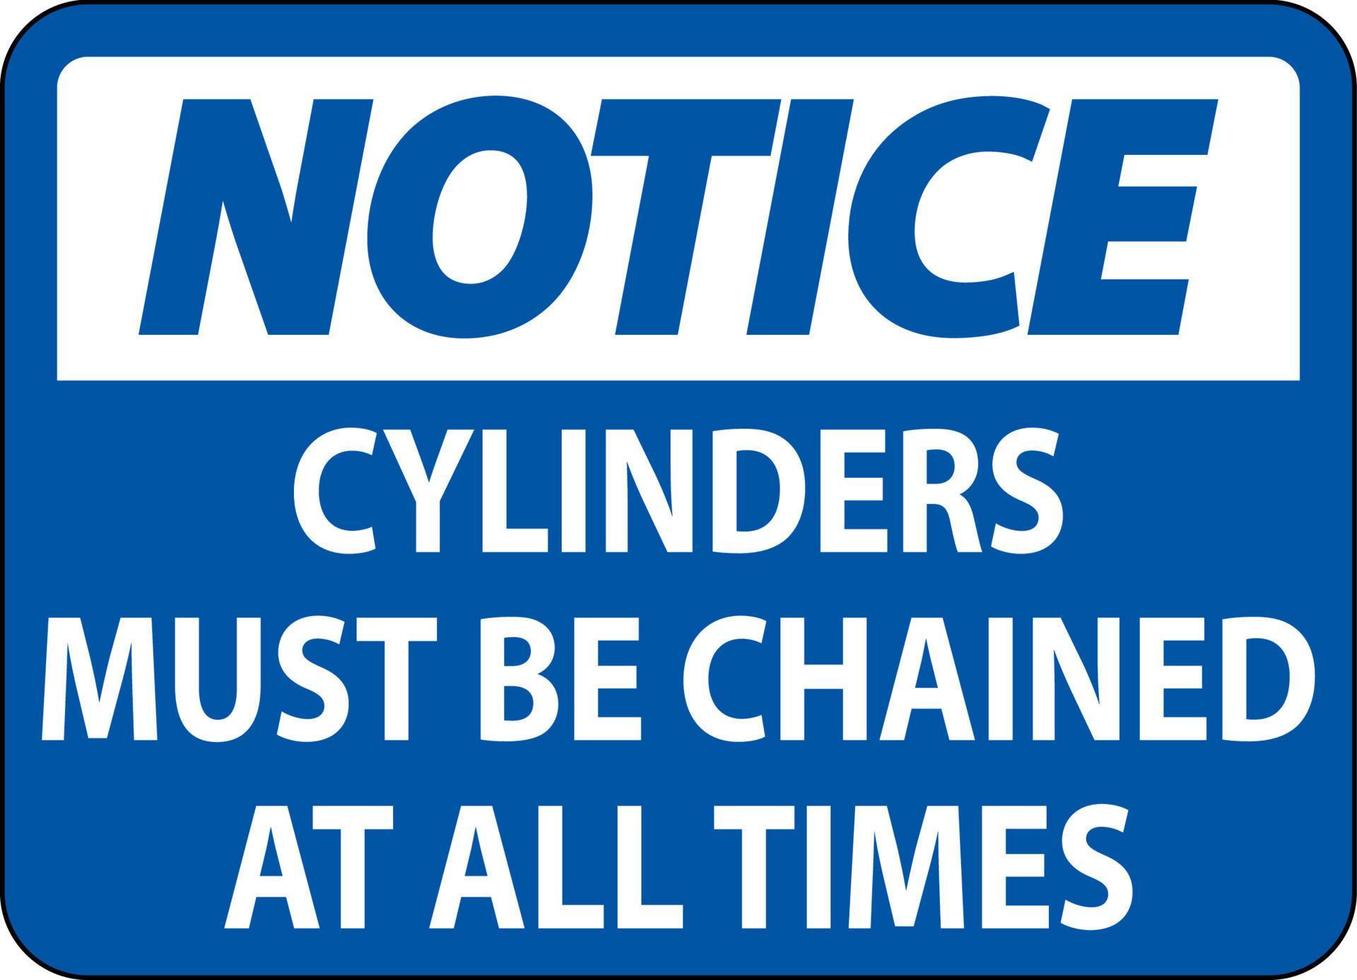 Notice Sign Cylinders Must Be Chained At All Times vector